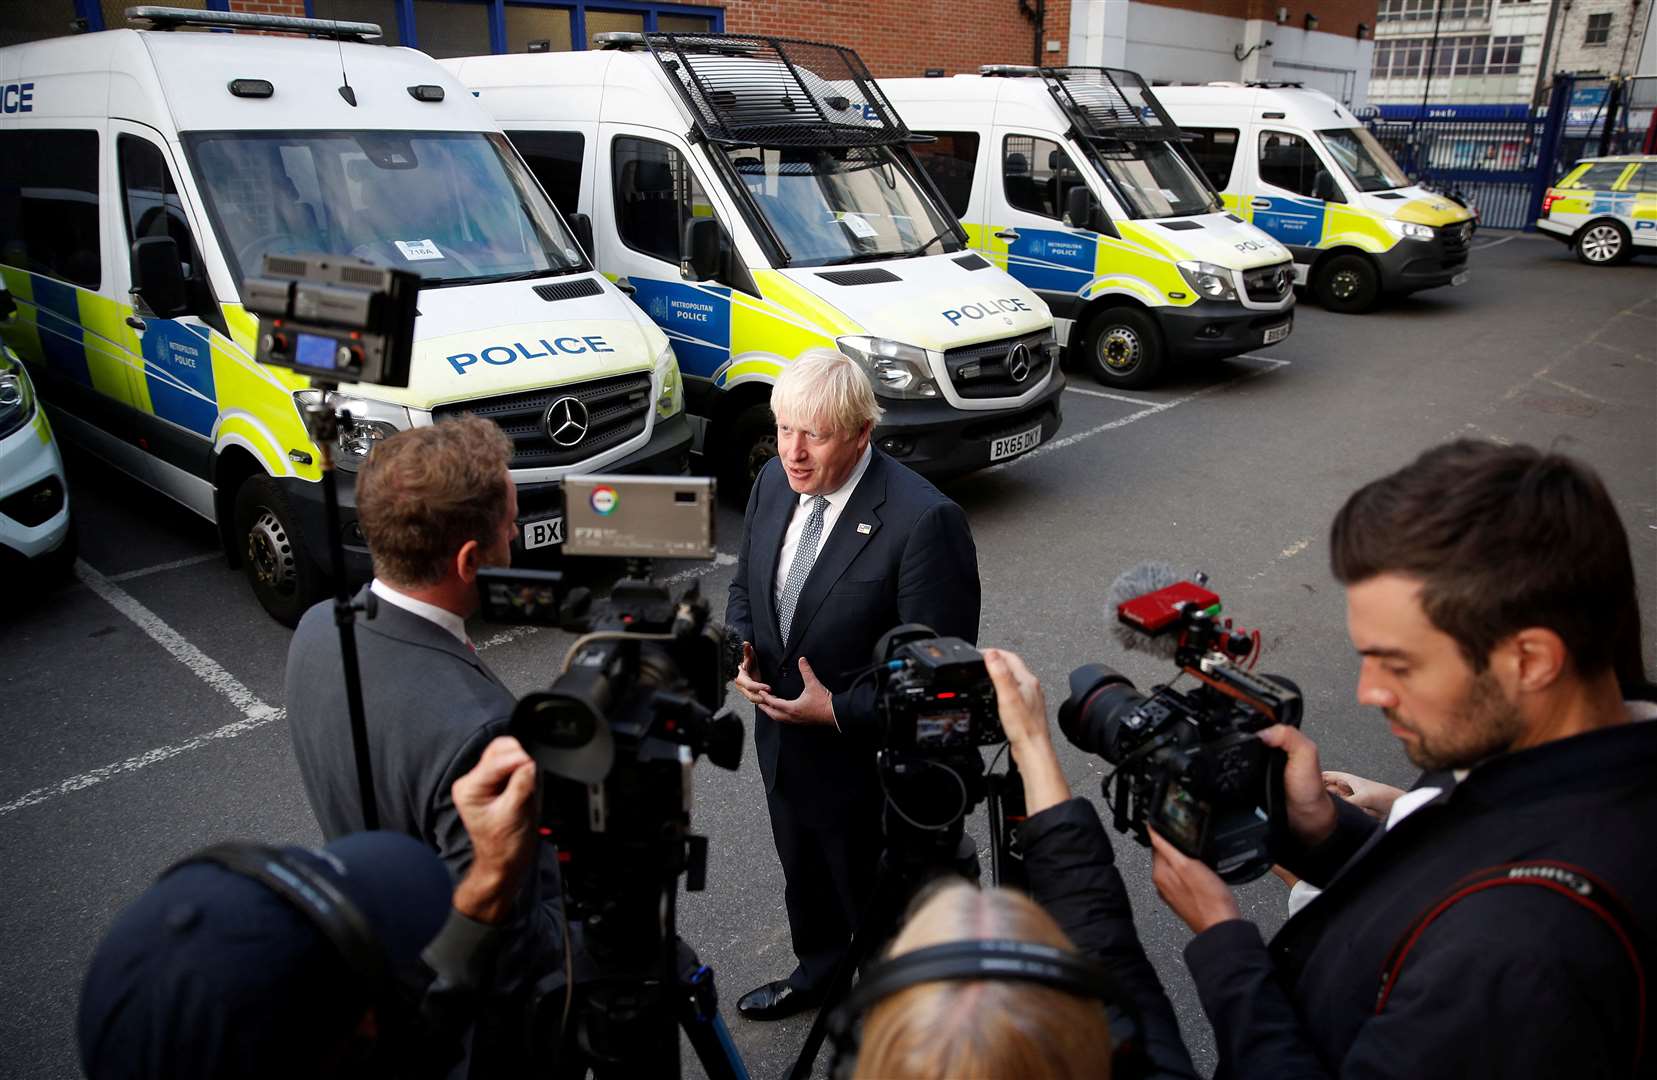 Boris Johnson speaks to the media at a police station in south-east London (Peter Nicholls/PA)